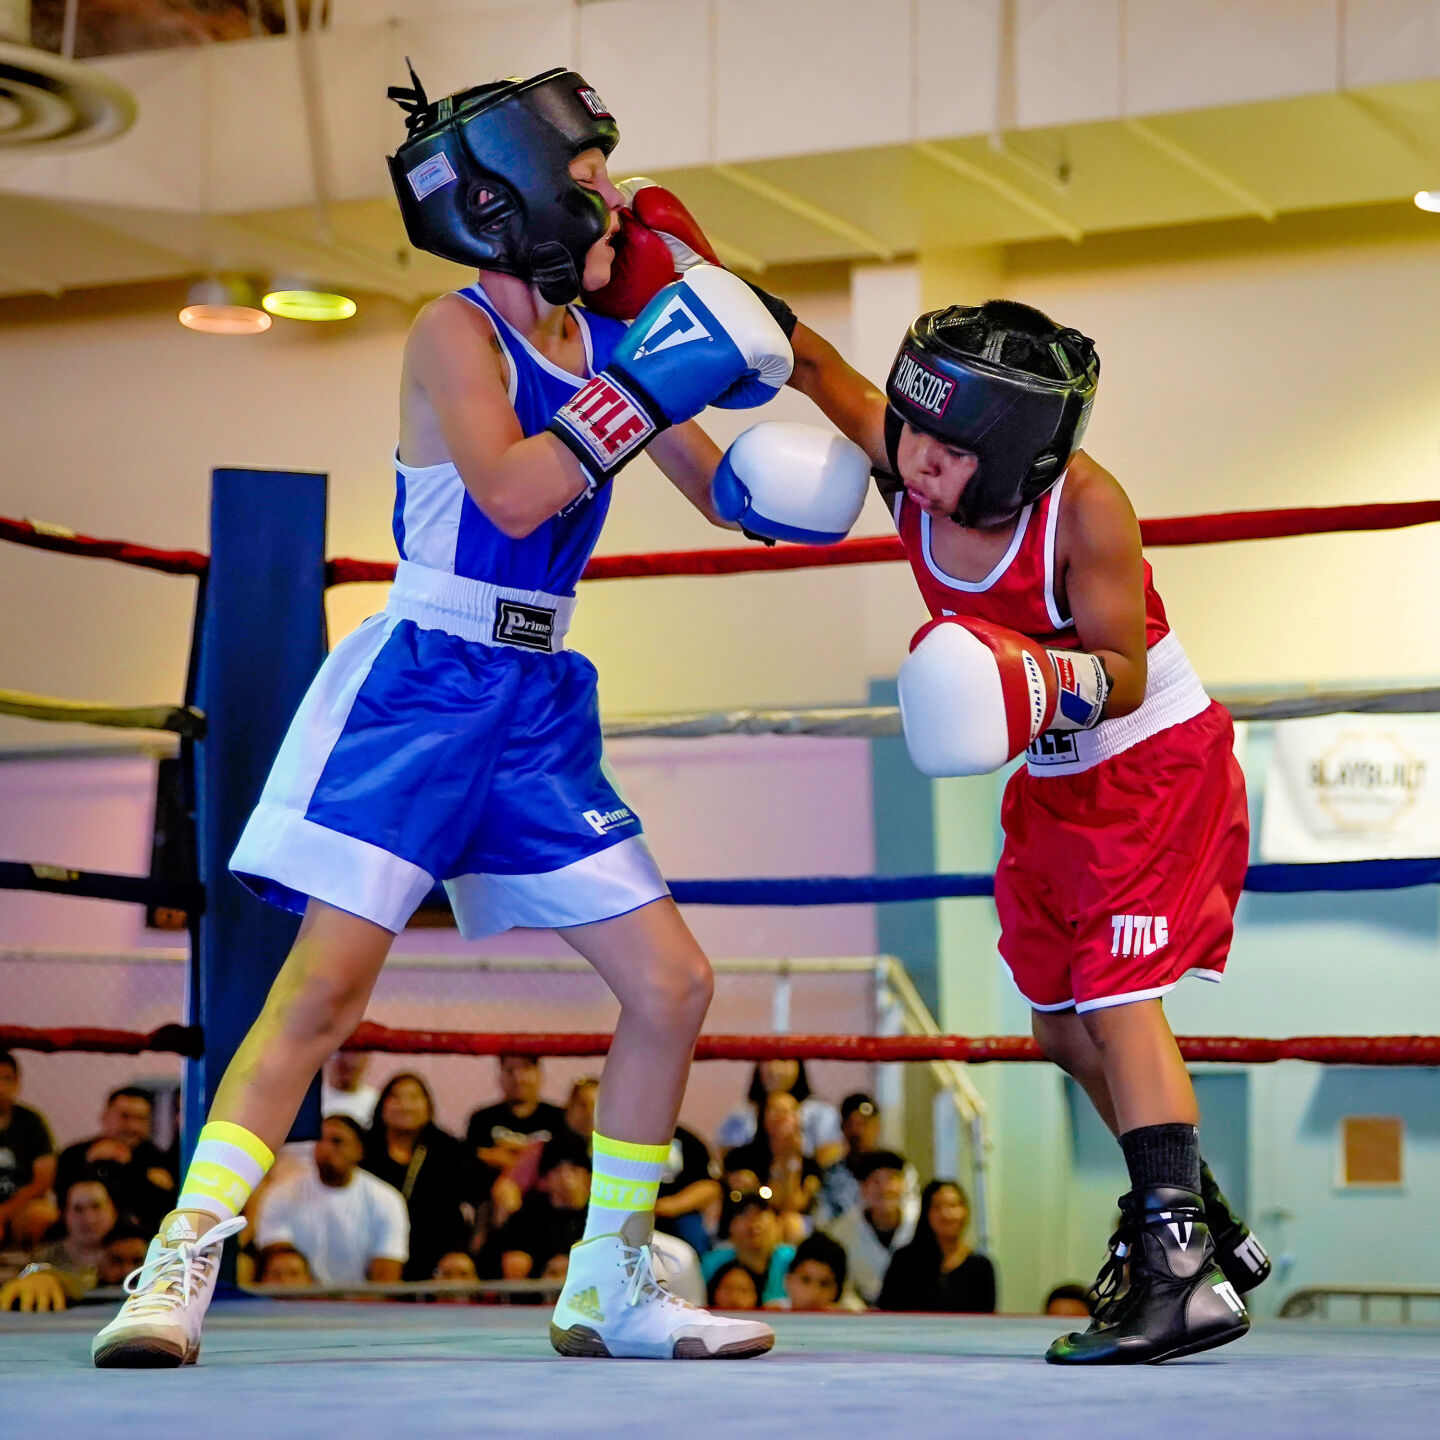 Napa Valley Youth Boxing Al Amanecer, Napa SAL fighters put on show photo